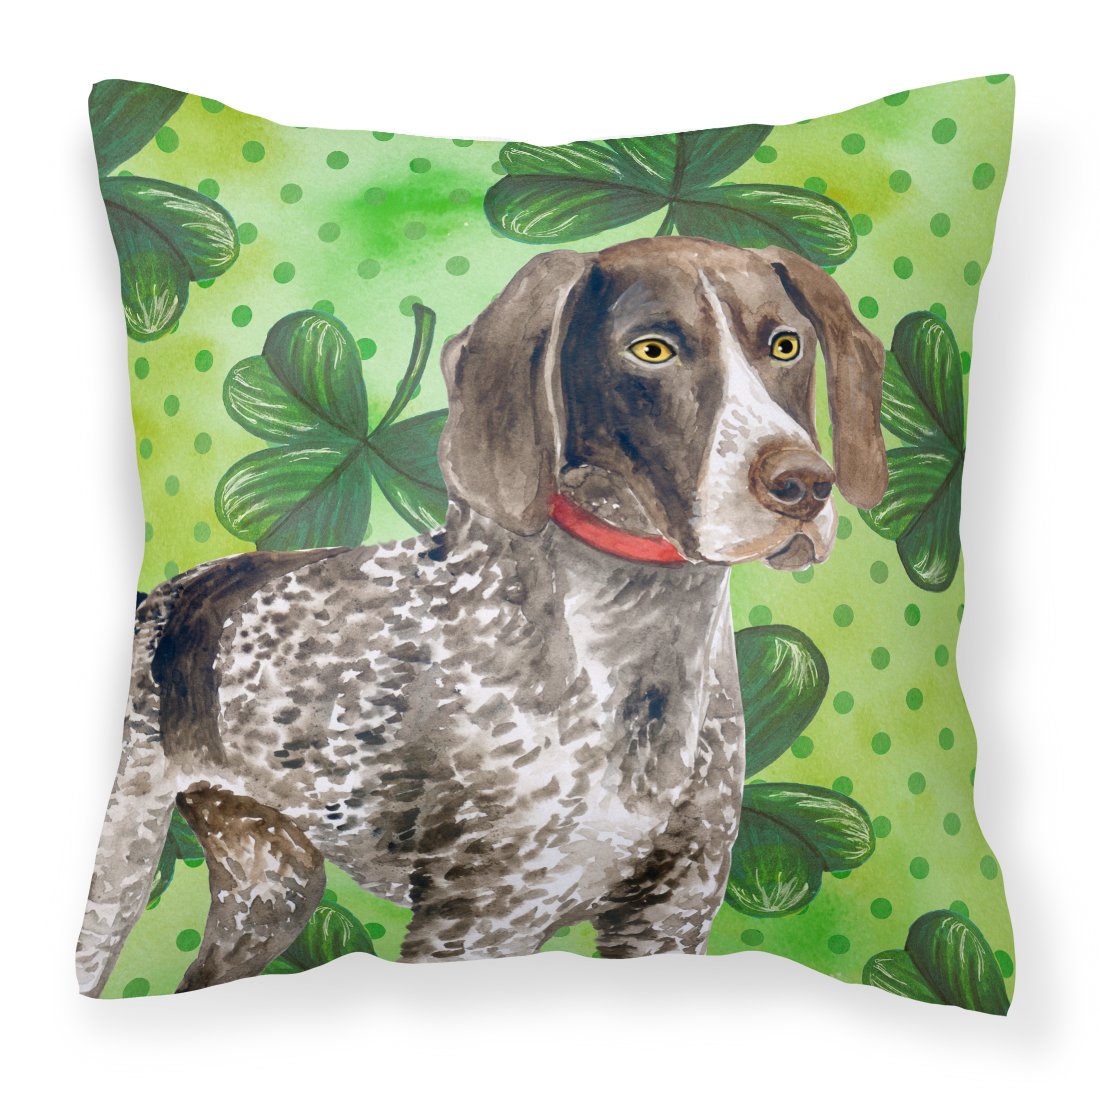 German Shorthaired Pointer St Patrick's Fabric Decorative Pillow BB9815PW1818 by Caroline's Treasures